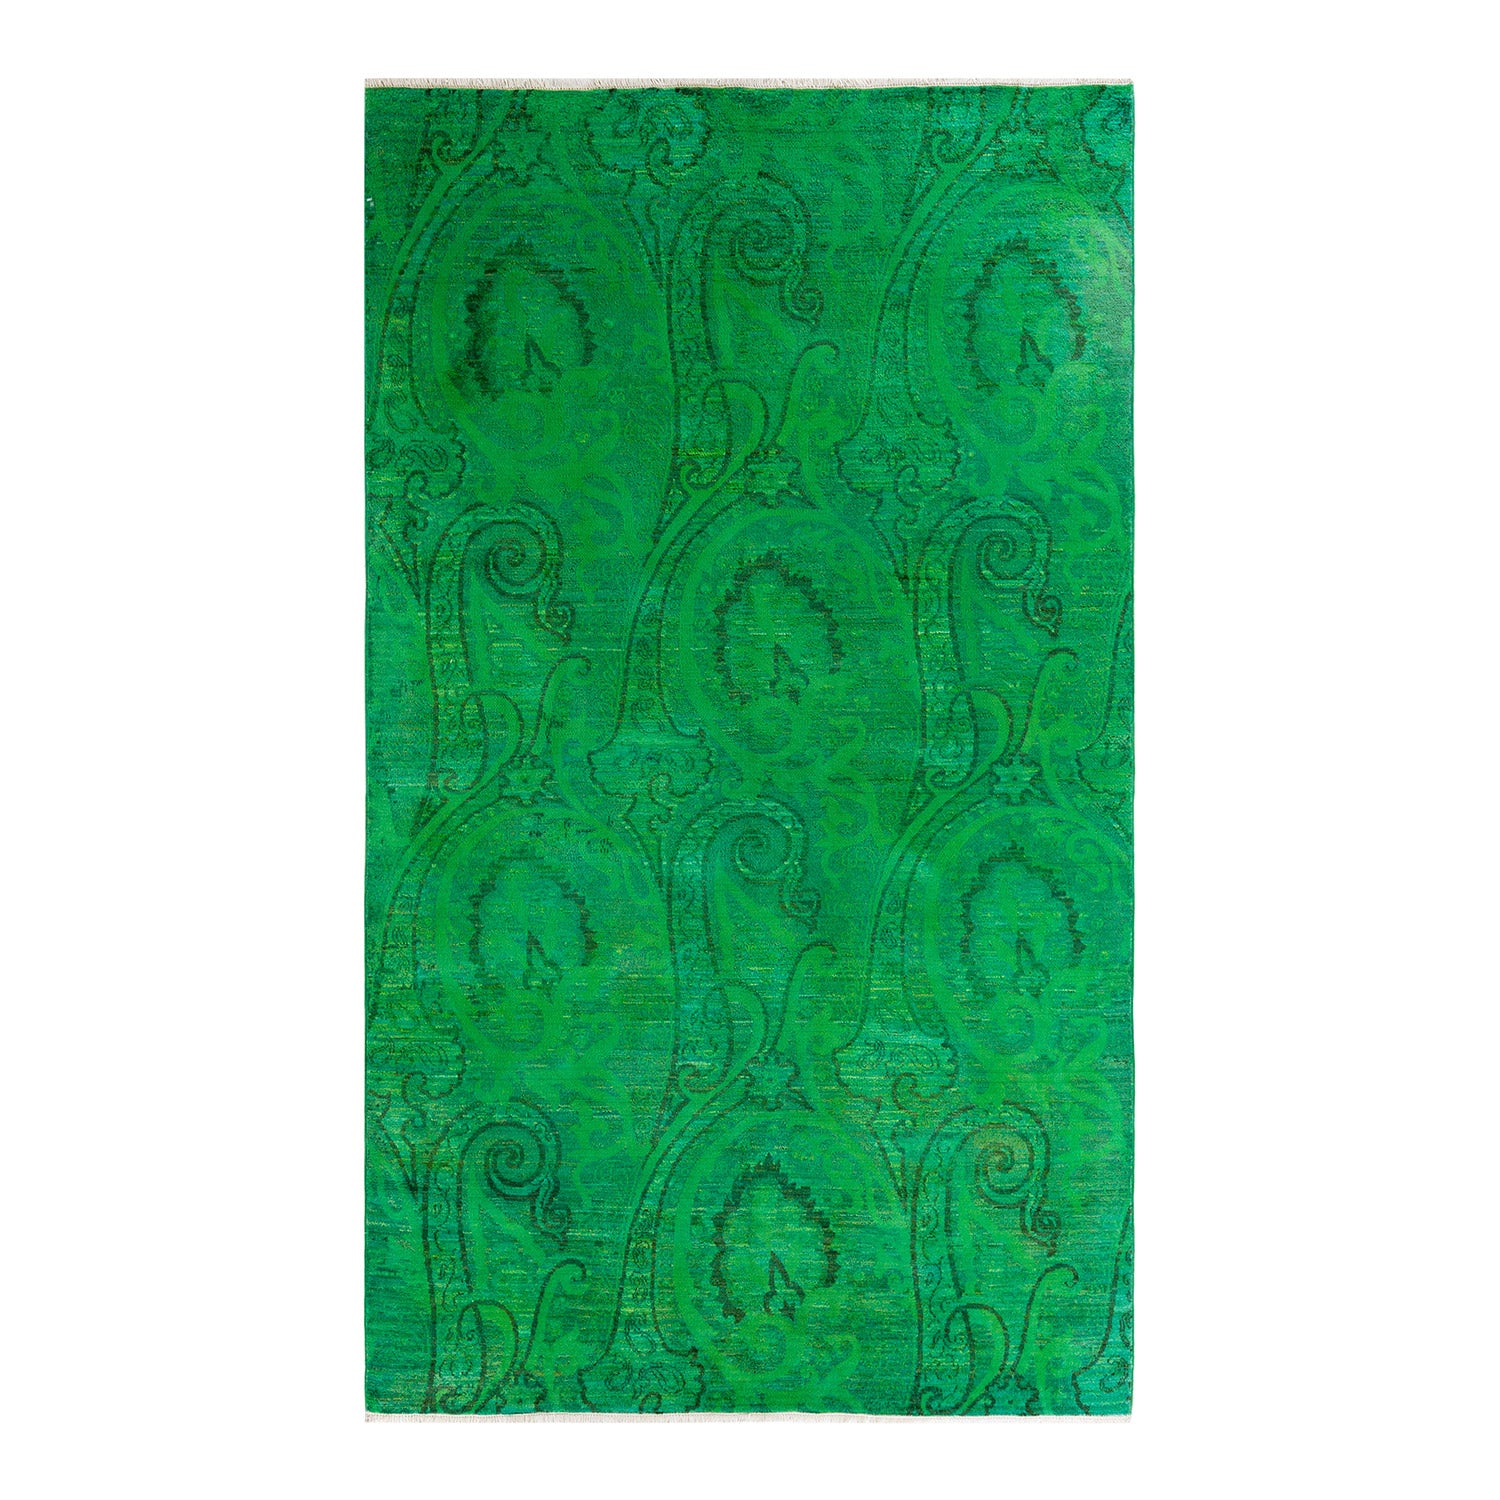 Classic elegance embodied in a rich green paisley-patterned carpet.